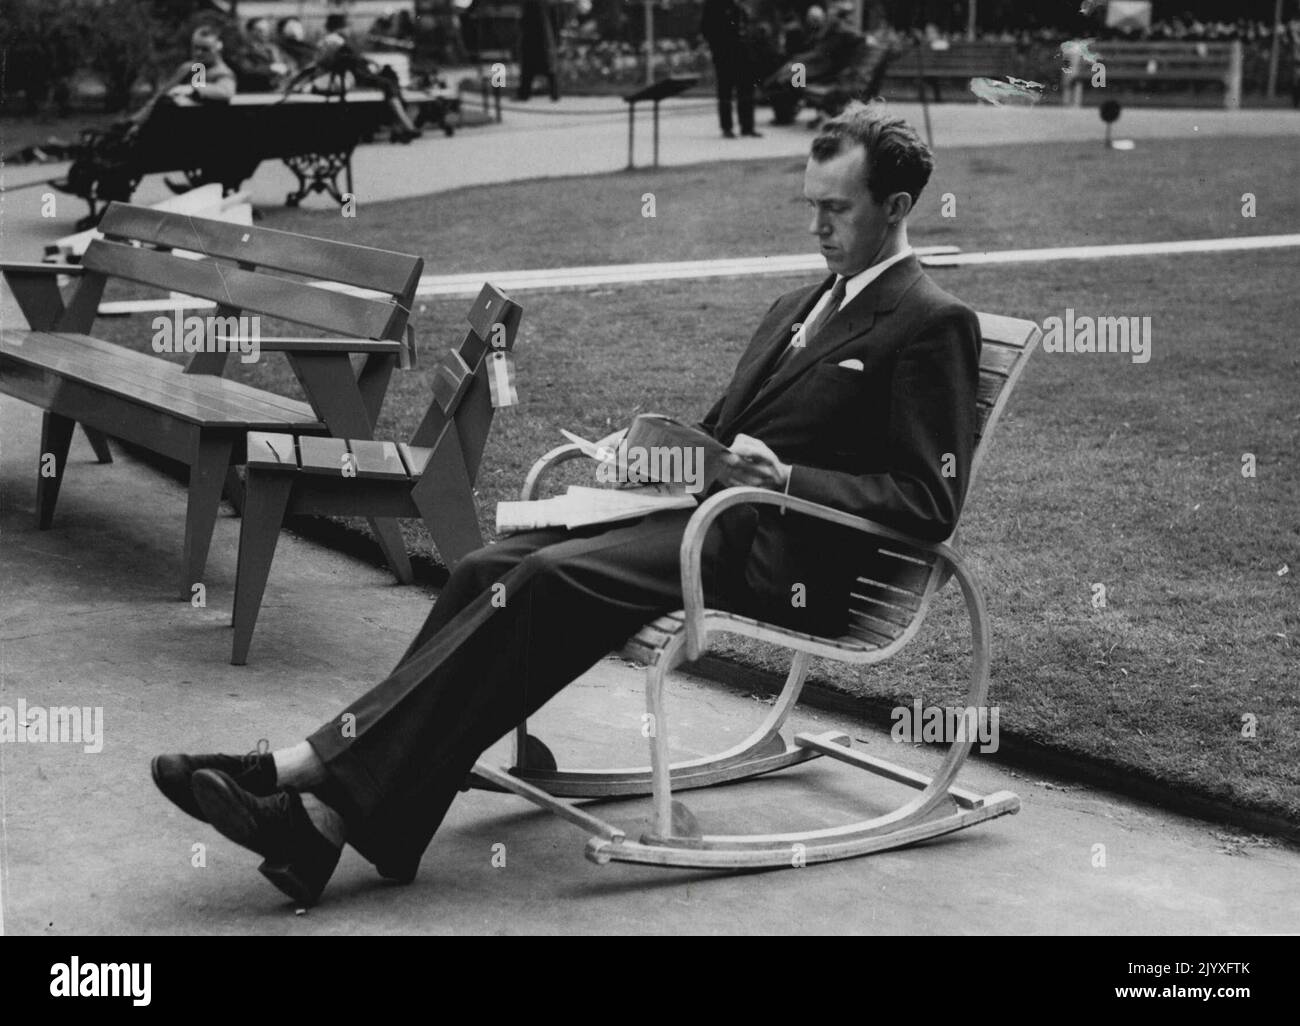 Parks/Park Shelters & Park Benches Etc. - Baby Misc. May 20, 1953. (Photo by Daily Mail Contract Picture). Stock Photo